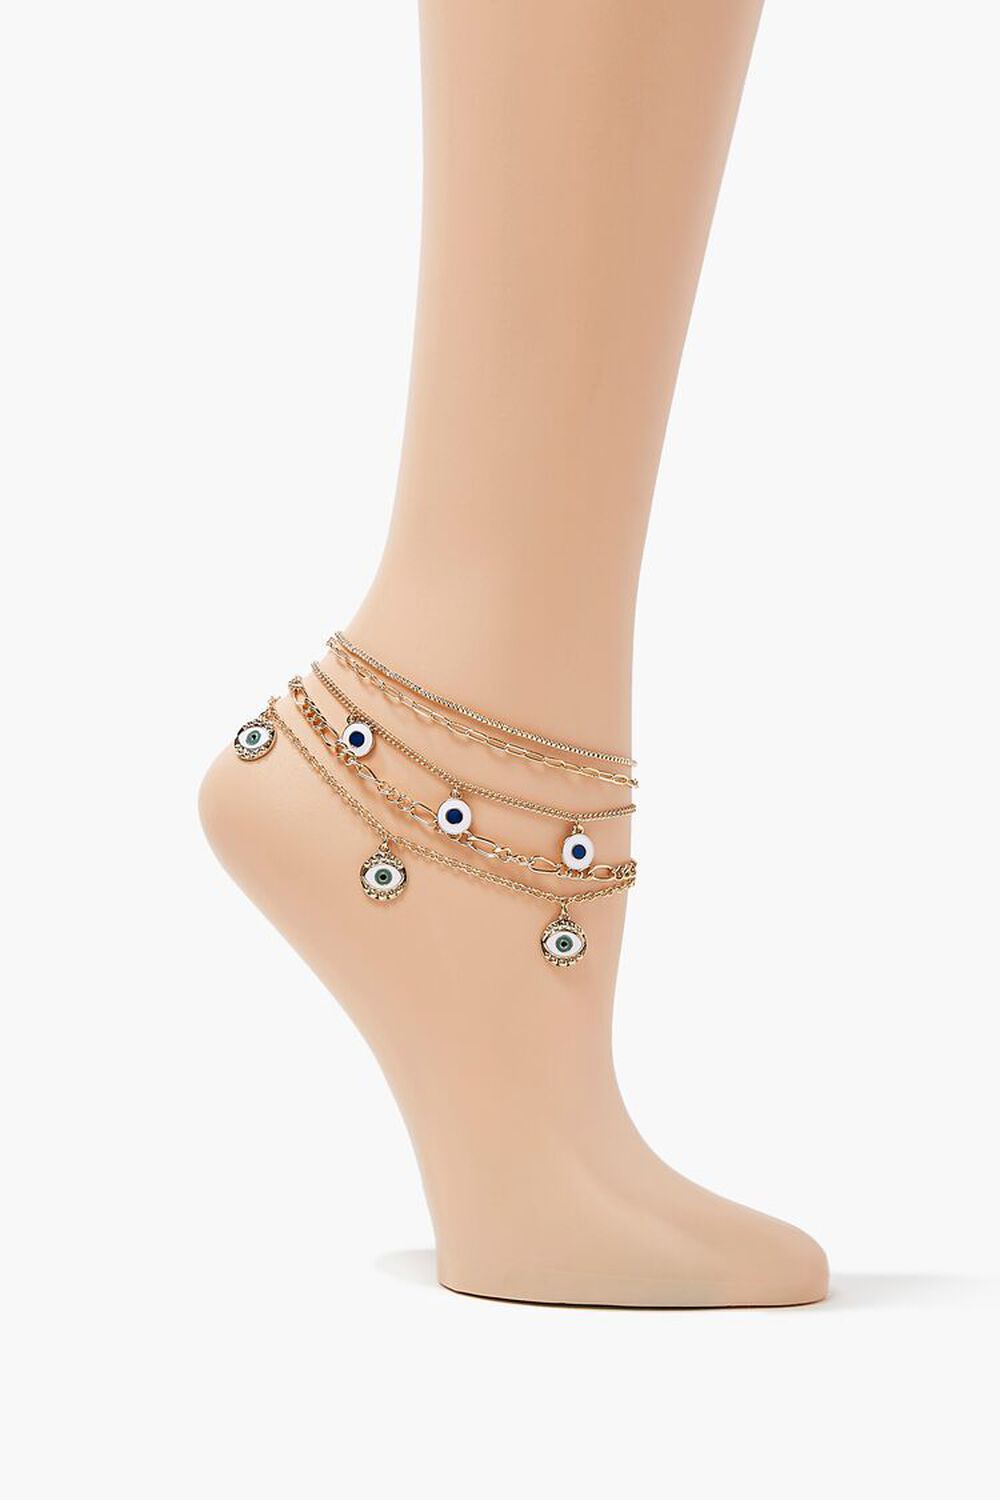 GOLD Evil Eye Layered Chain Anklet, image 1